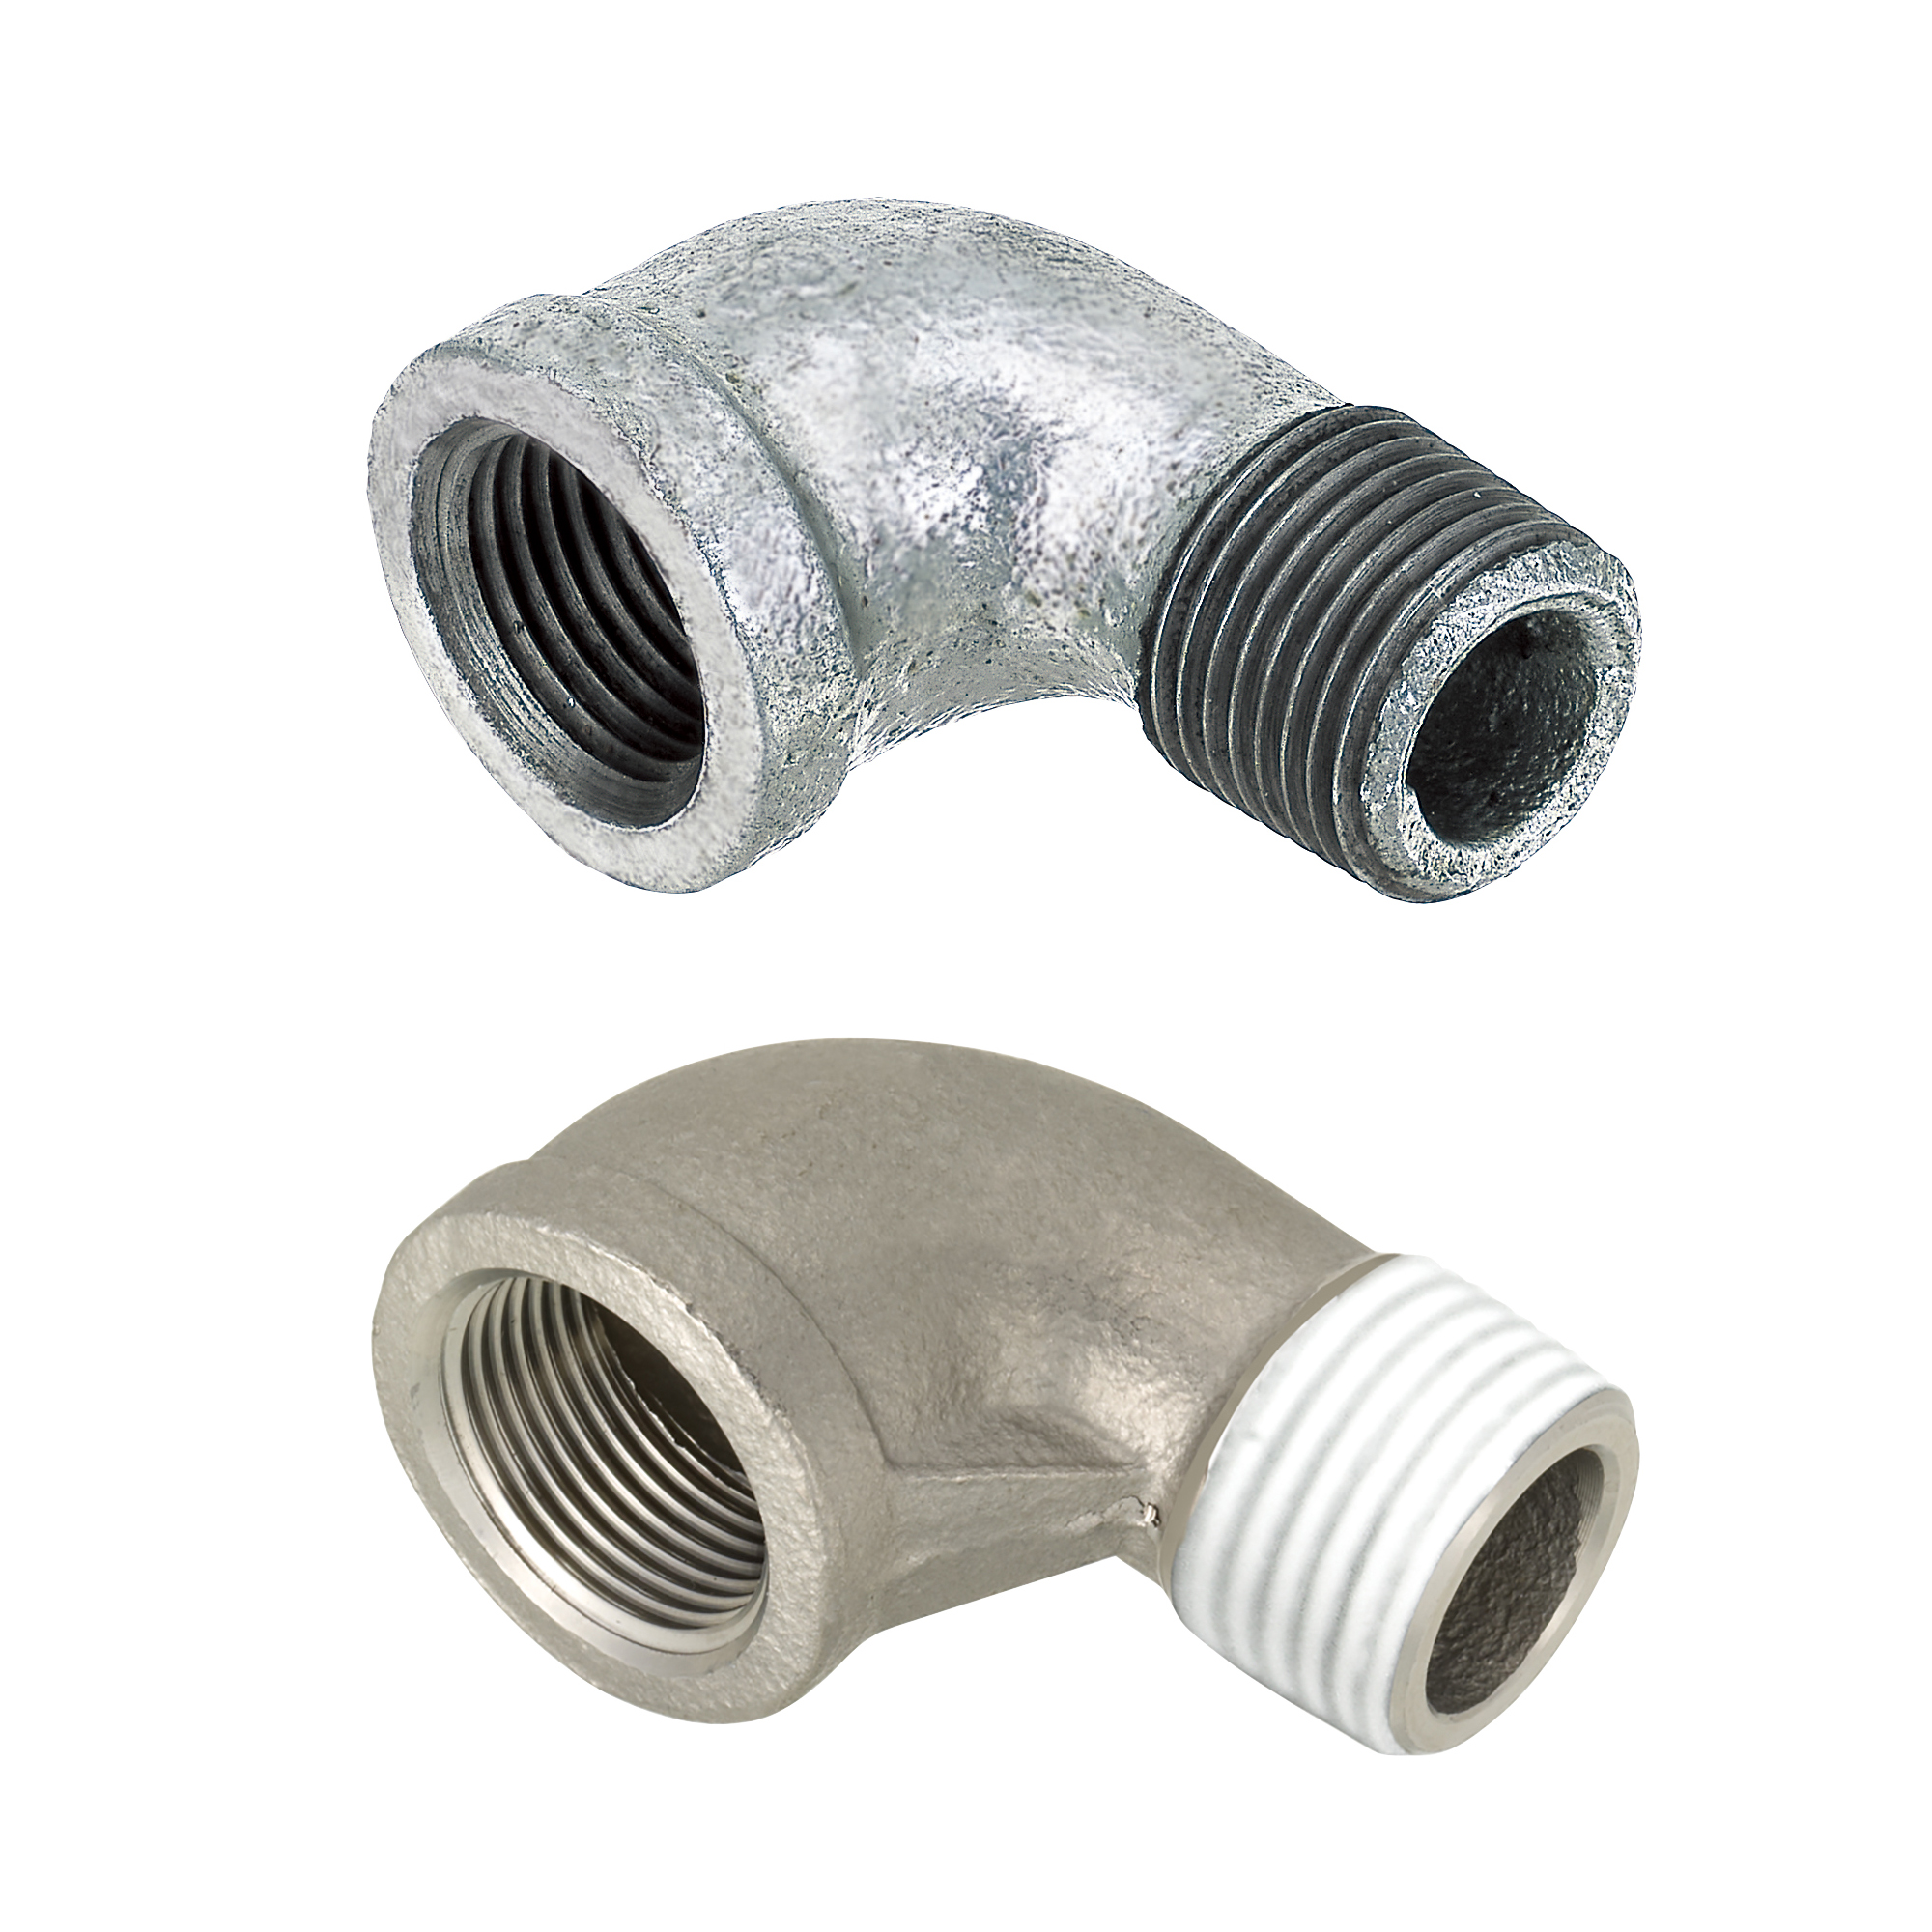 Low Pressure Fittings/90 Deg. Elbow/Threaded and Tapped (SUTPEL25A) 